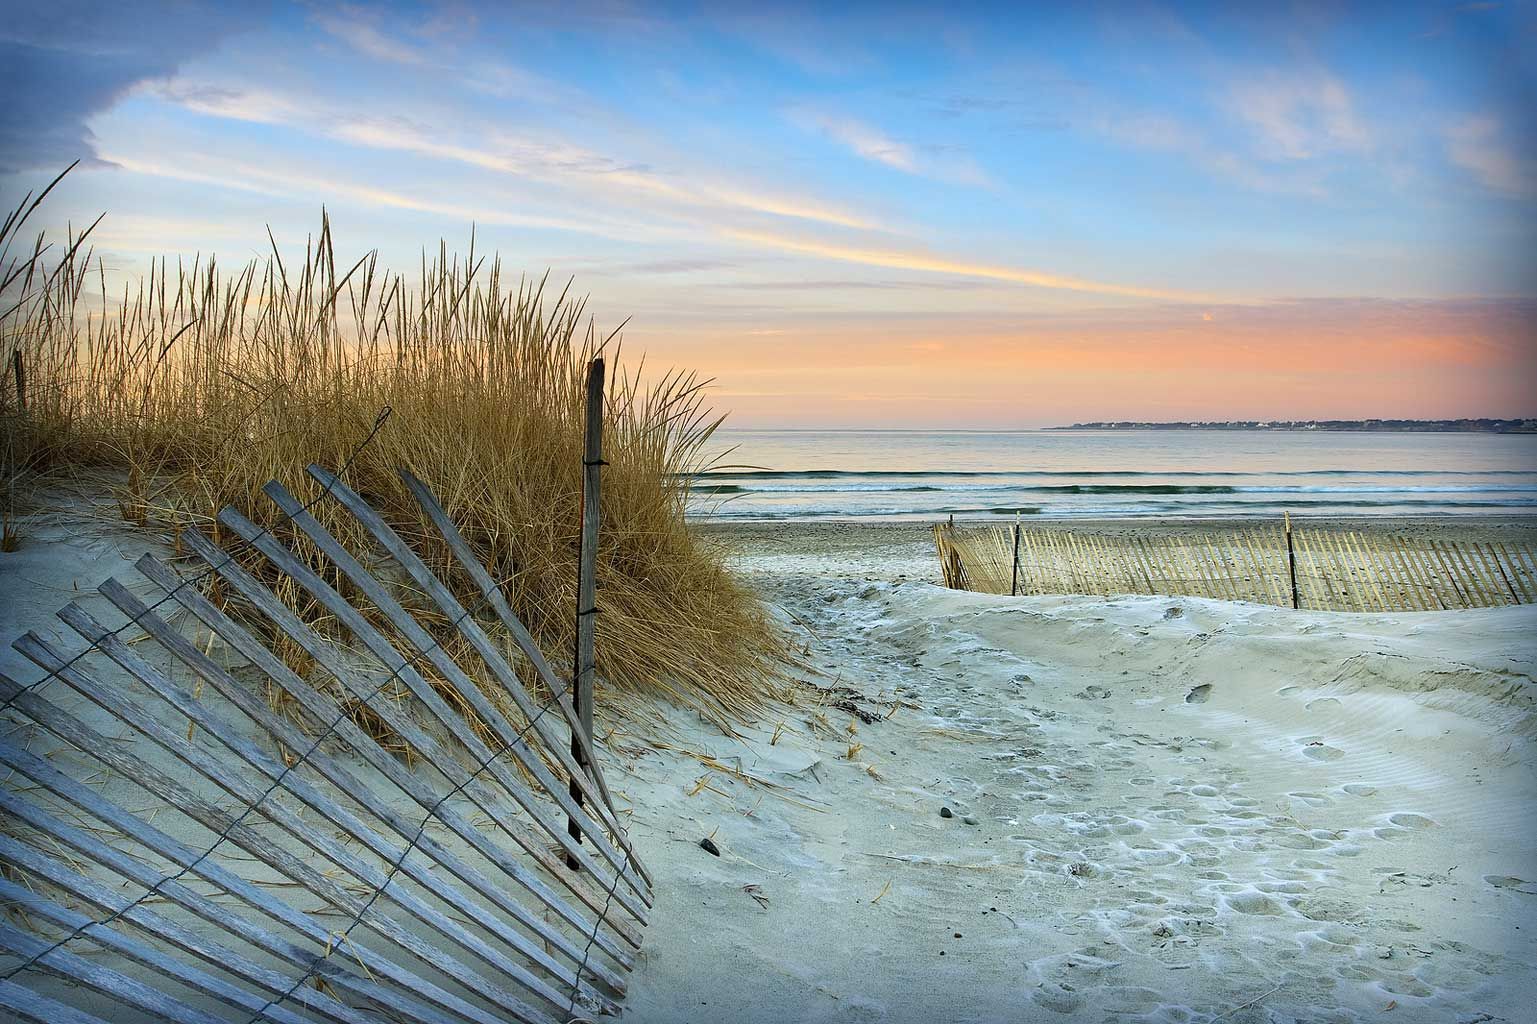 Another Nearby Place To Visit Down The Shore Is Lbi Or Long Beach